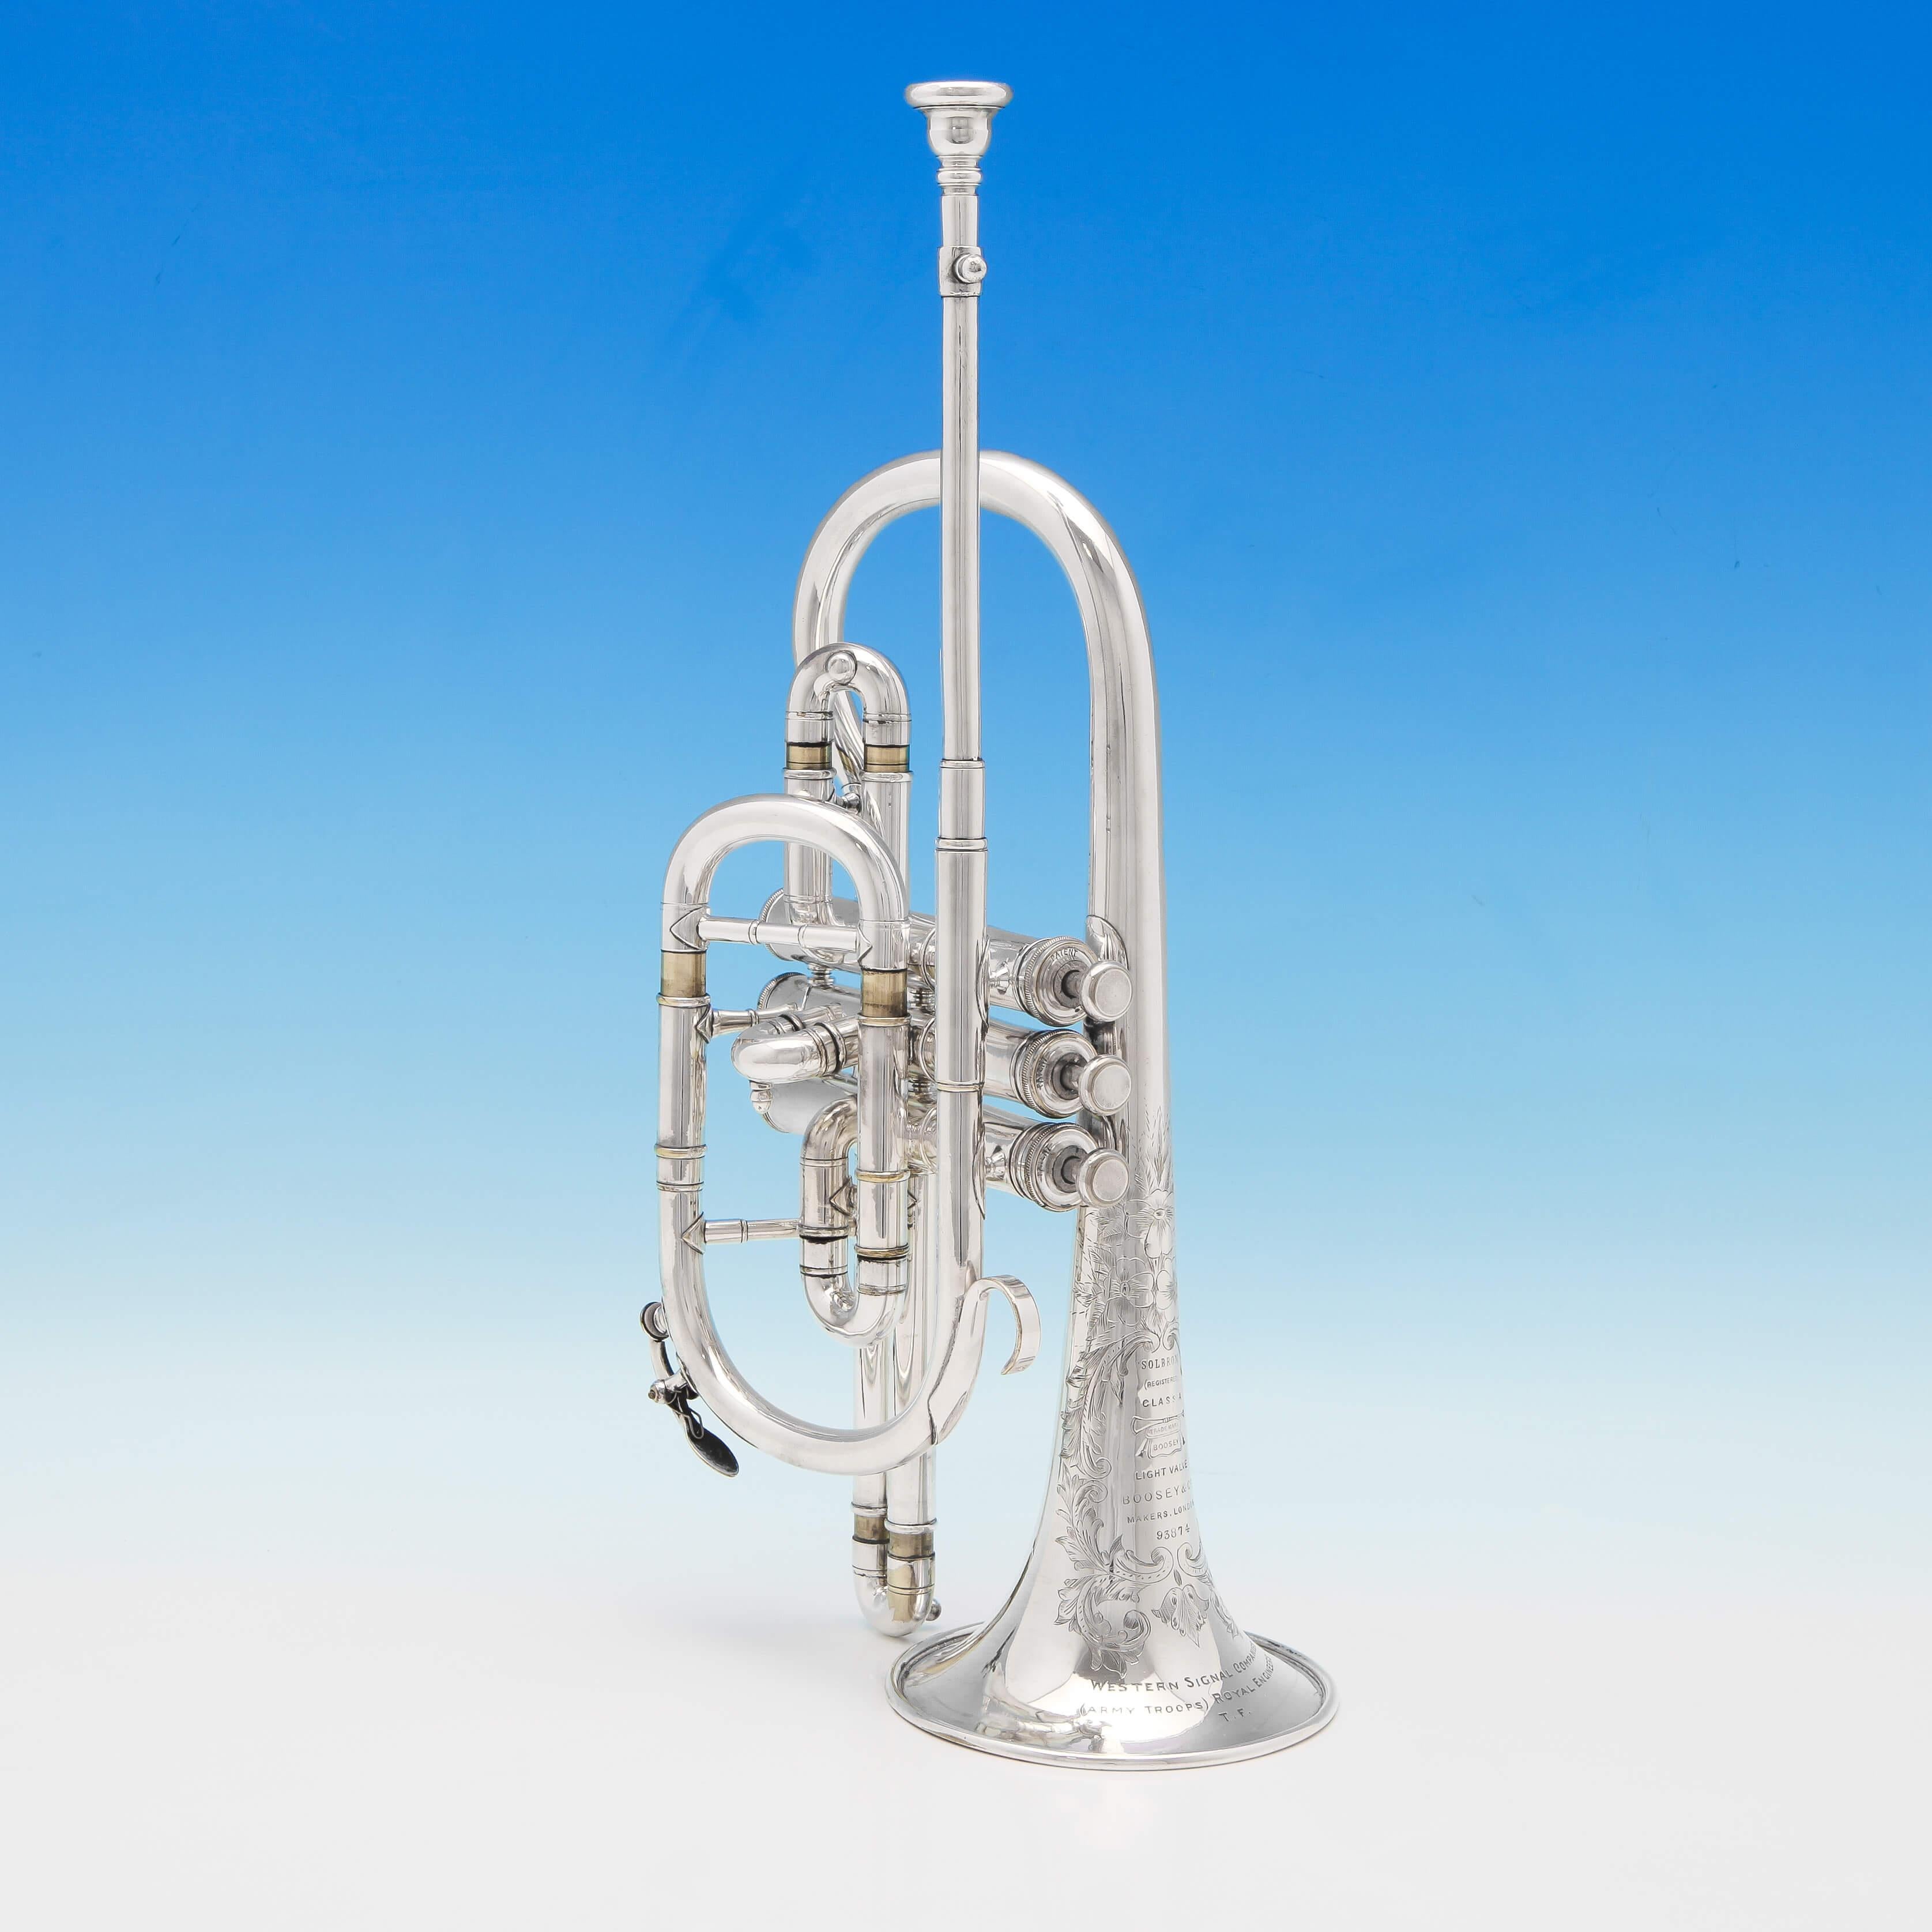 Made circa 1915, this antique, silver plated, First World War Cornet is a design registered by Solbron, made by Boosey & Co., and is engraved with an inscription with reads 'Western Signal Companies - (Army Troops) Royal Engineers - T. F.'. The